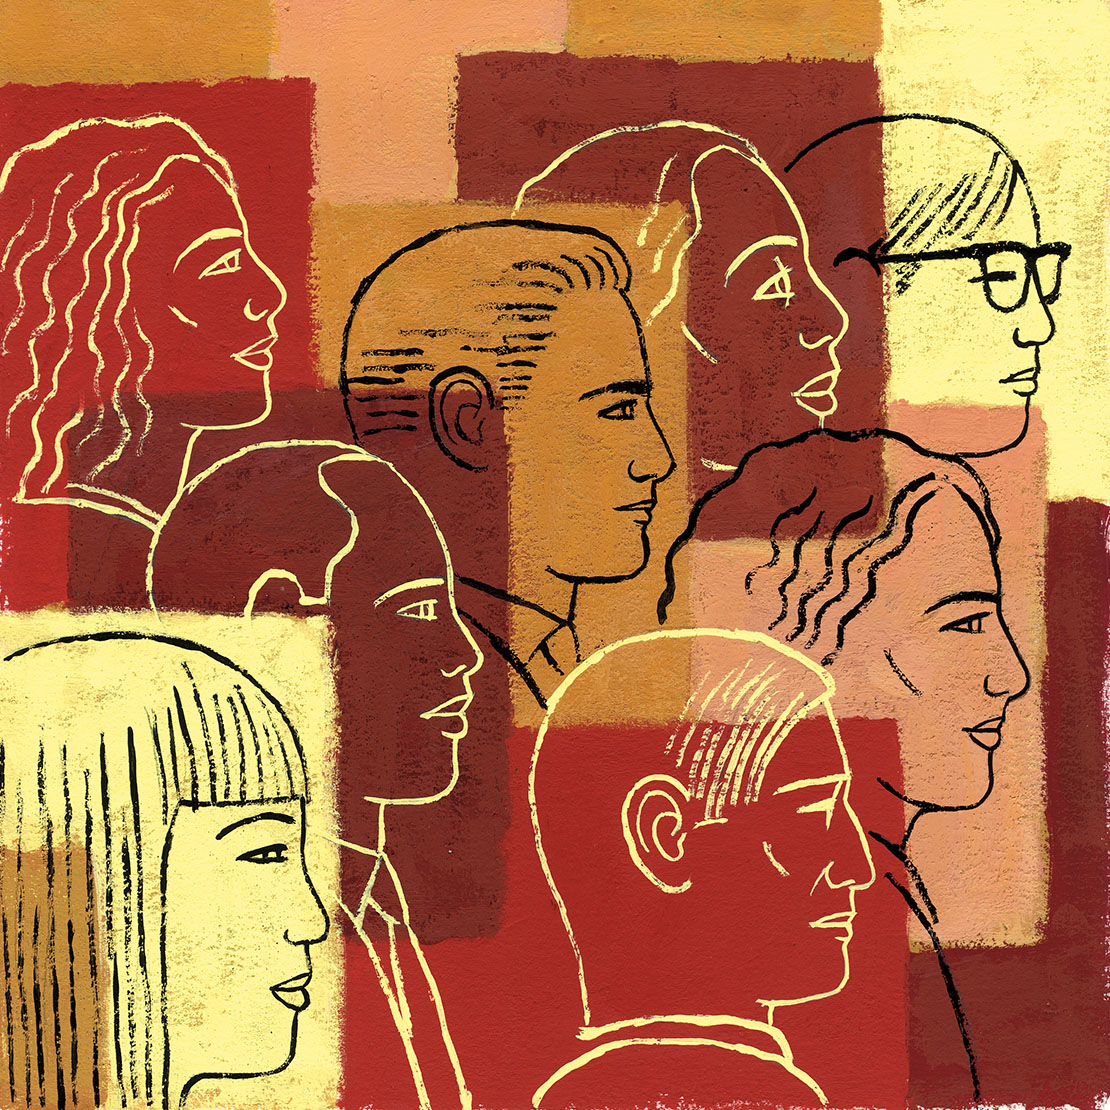 abstract illustration showing racially diverse faces